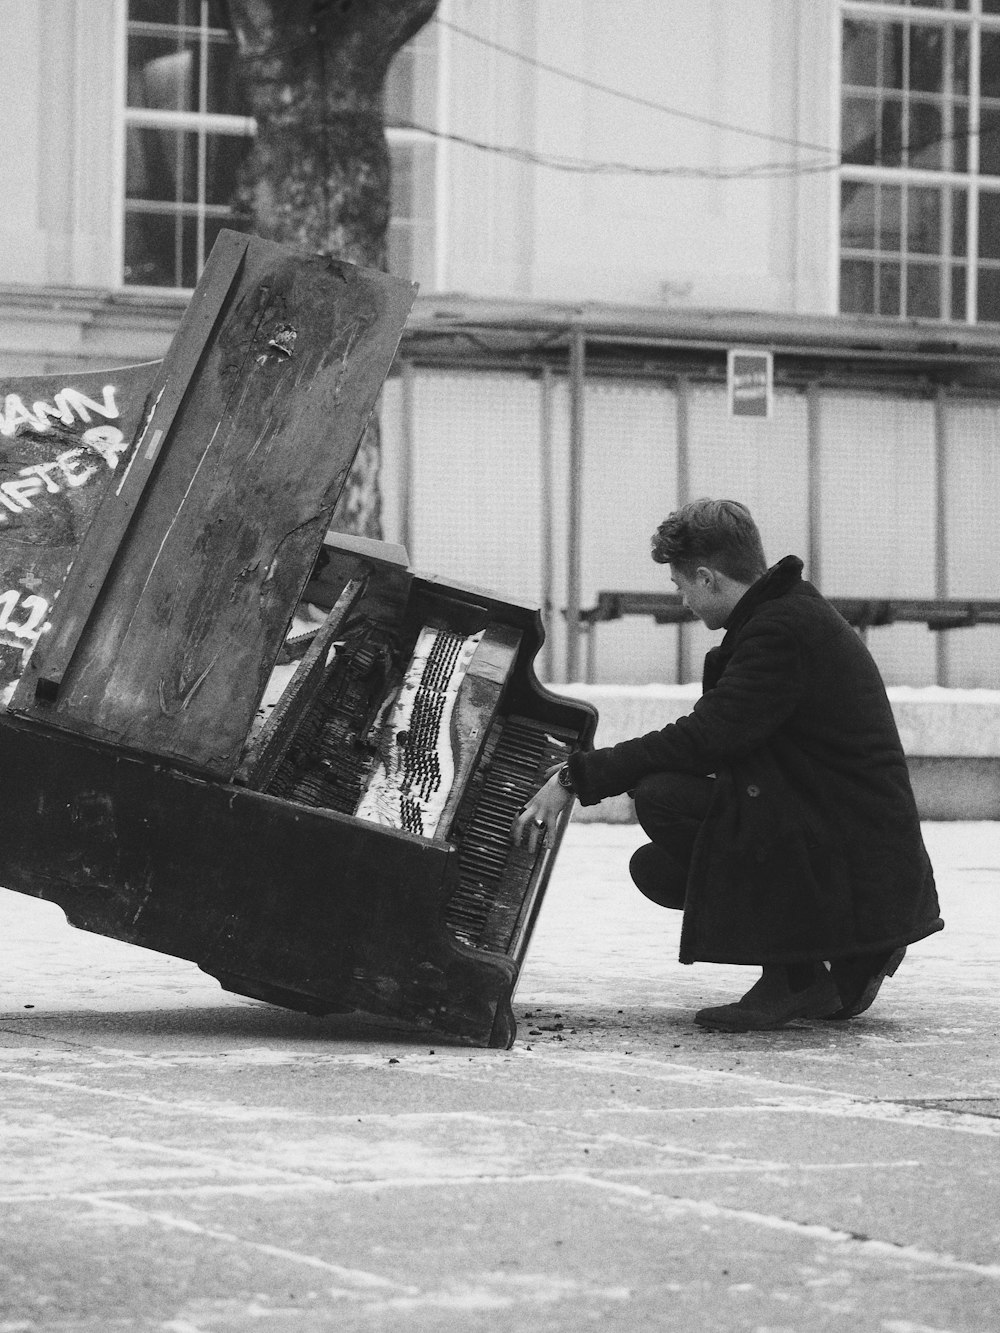 grayscale photography of man crouching in front of damaged piano